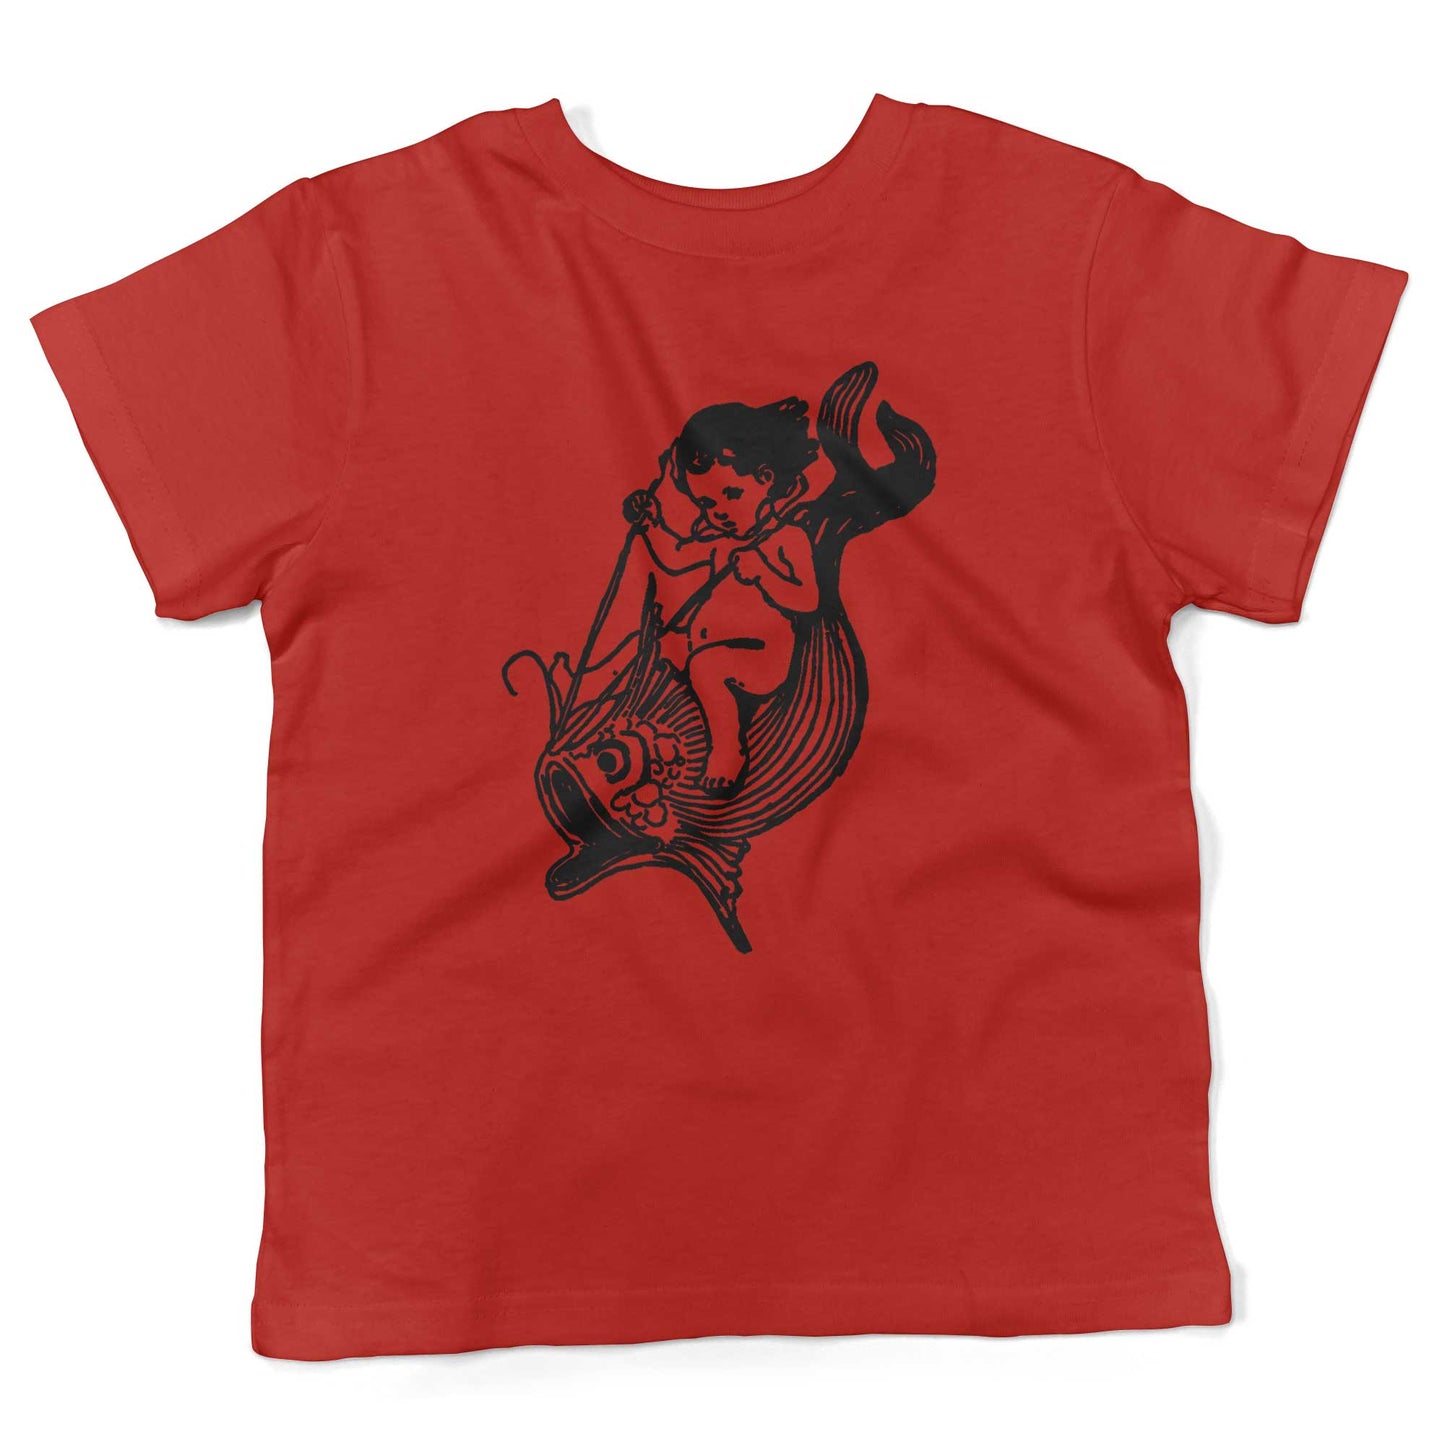 Water Baby Riding A Giant Fish Toddler Shirt-Red-2T